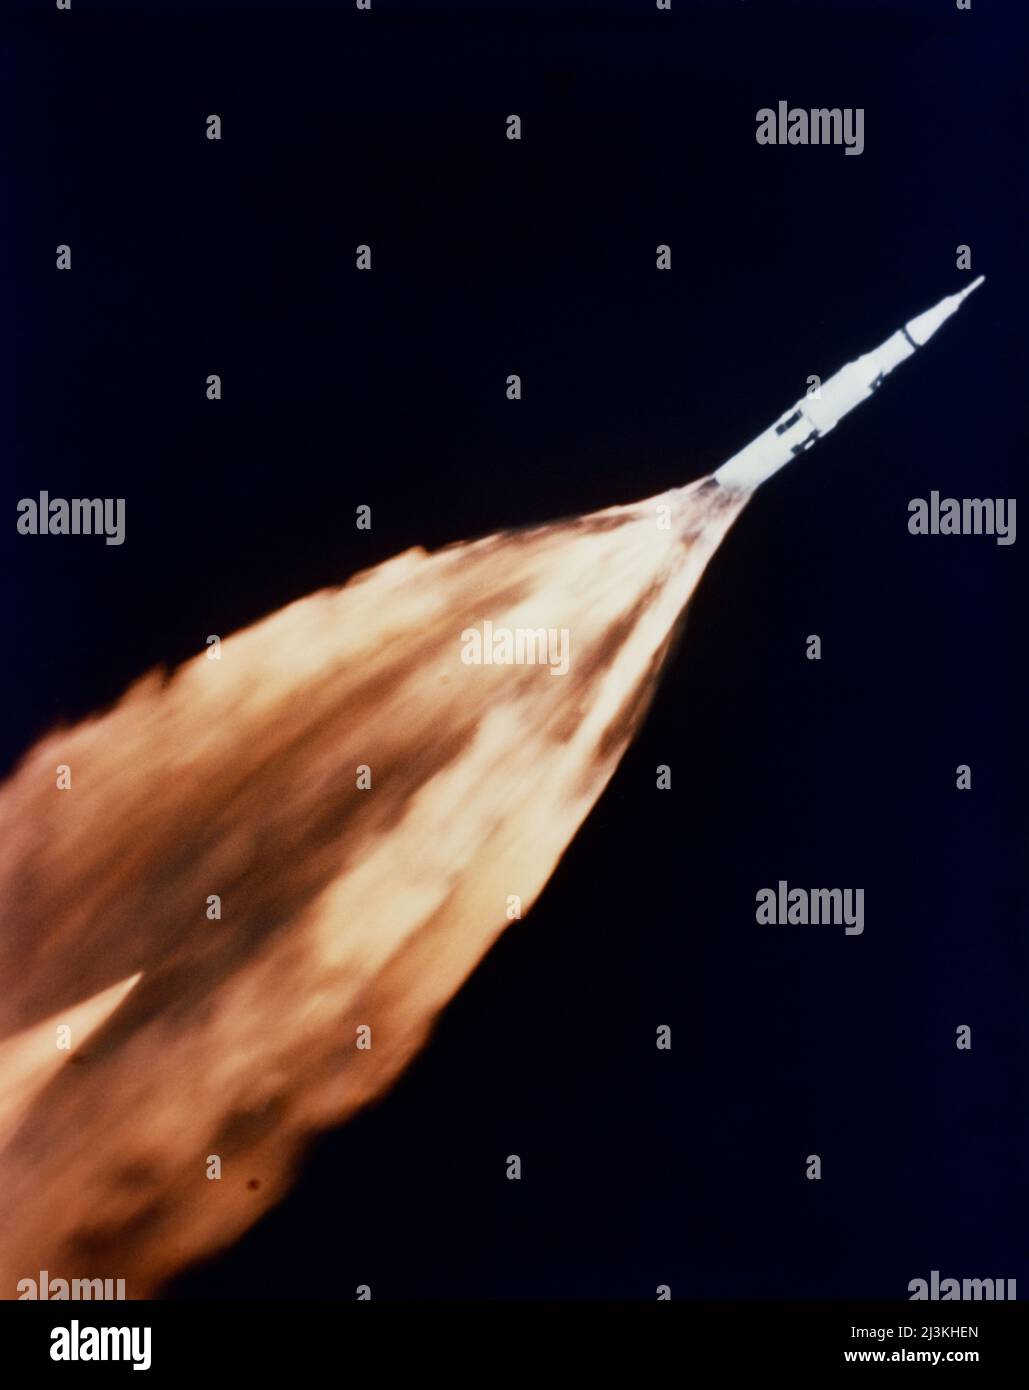 The five F-1 engines of the huge Apollo/Saturn V srocket leave a gigantic trail of flame in the sky above the Kennedy Space Center seconds after liftoff. The launch of the Apollo 6 (Spacecraft 020/Saturn 502) unmanned space mission was on, April 4, 1968. This view of the Apollo 6 launch was taken from a chase plane. Stock Photo